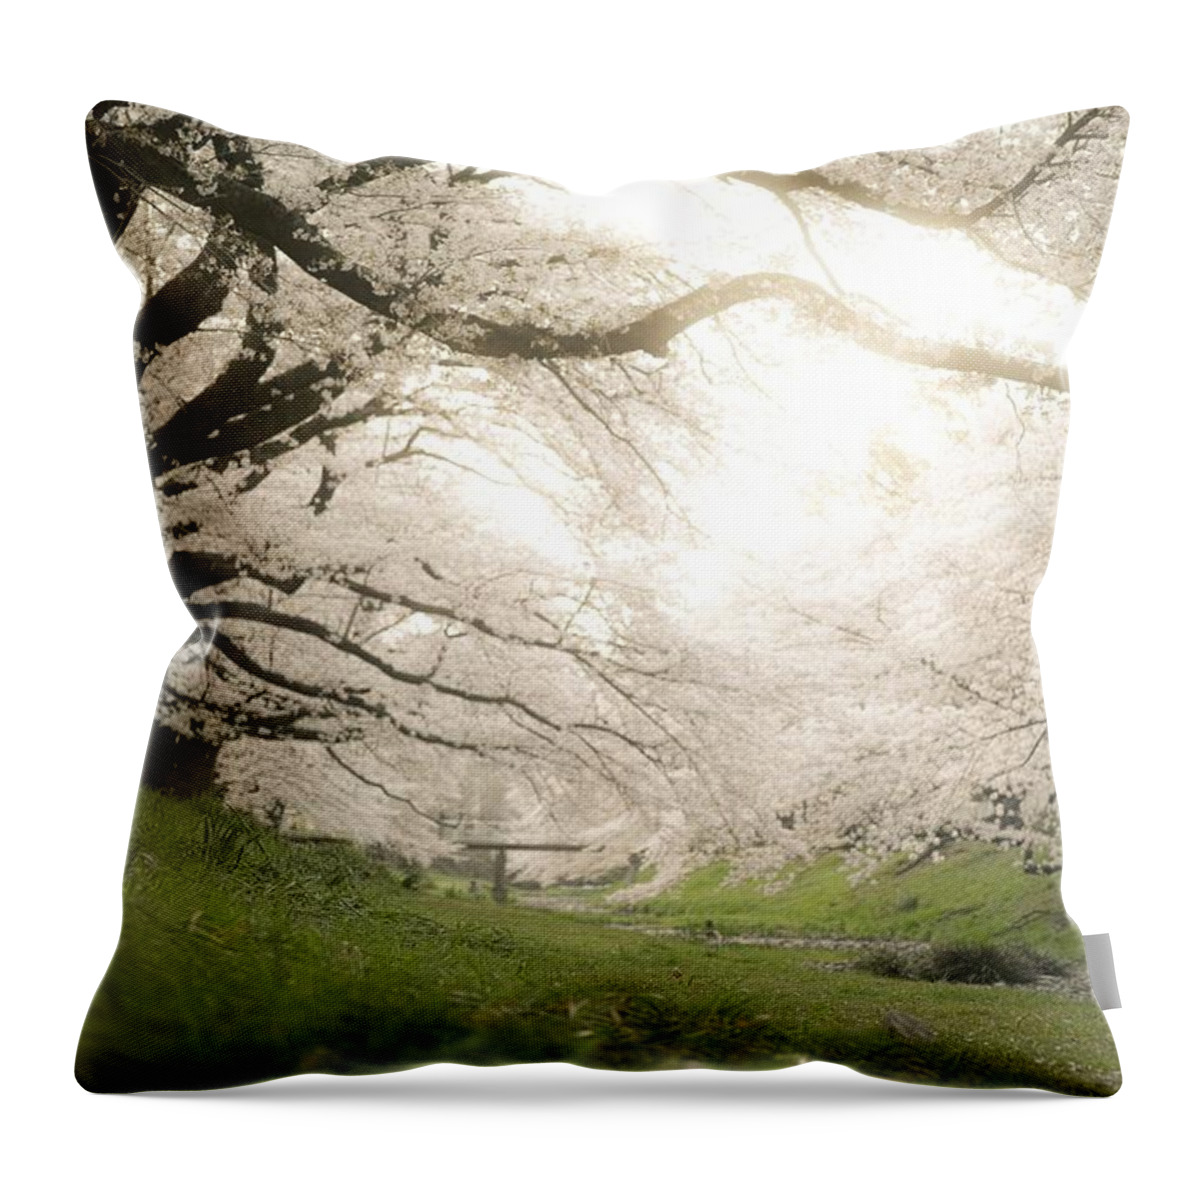 Cherryblossoms Throw Pillow featuring the photograph Cherry blossoms#7 by Yasuhiro Fukui